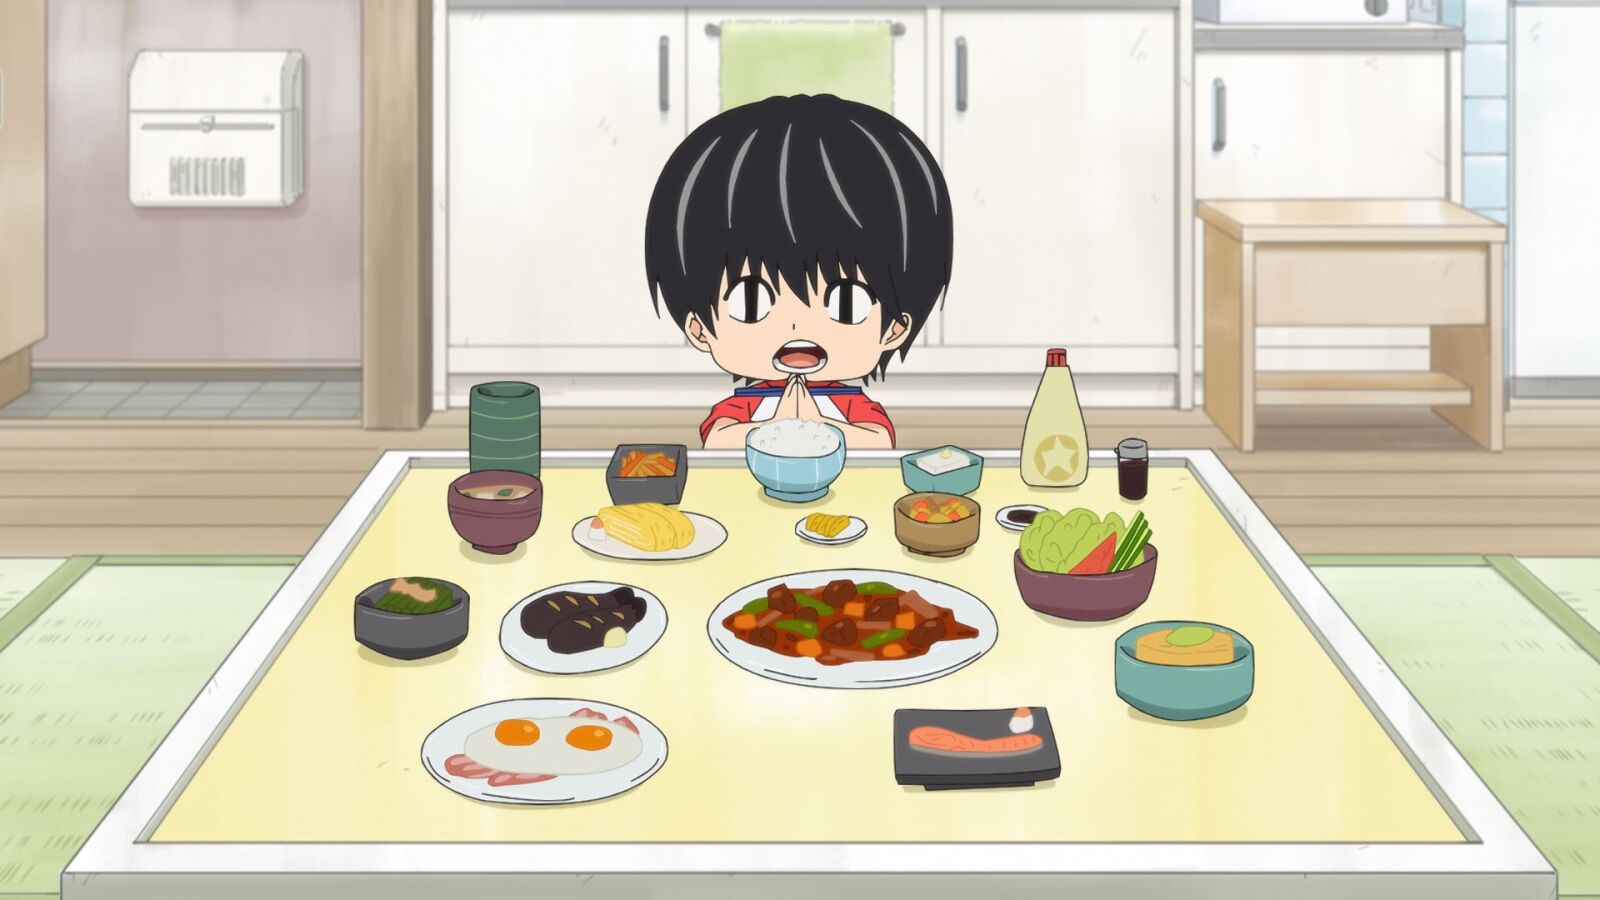 Kotaro with several dishes on his table